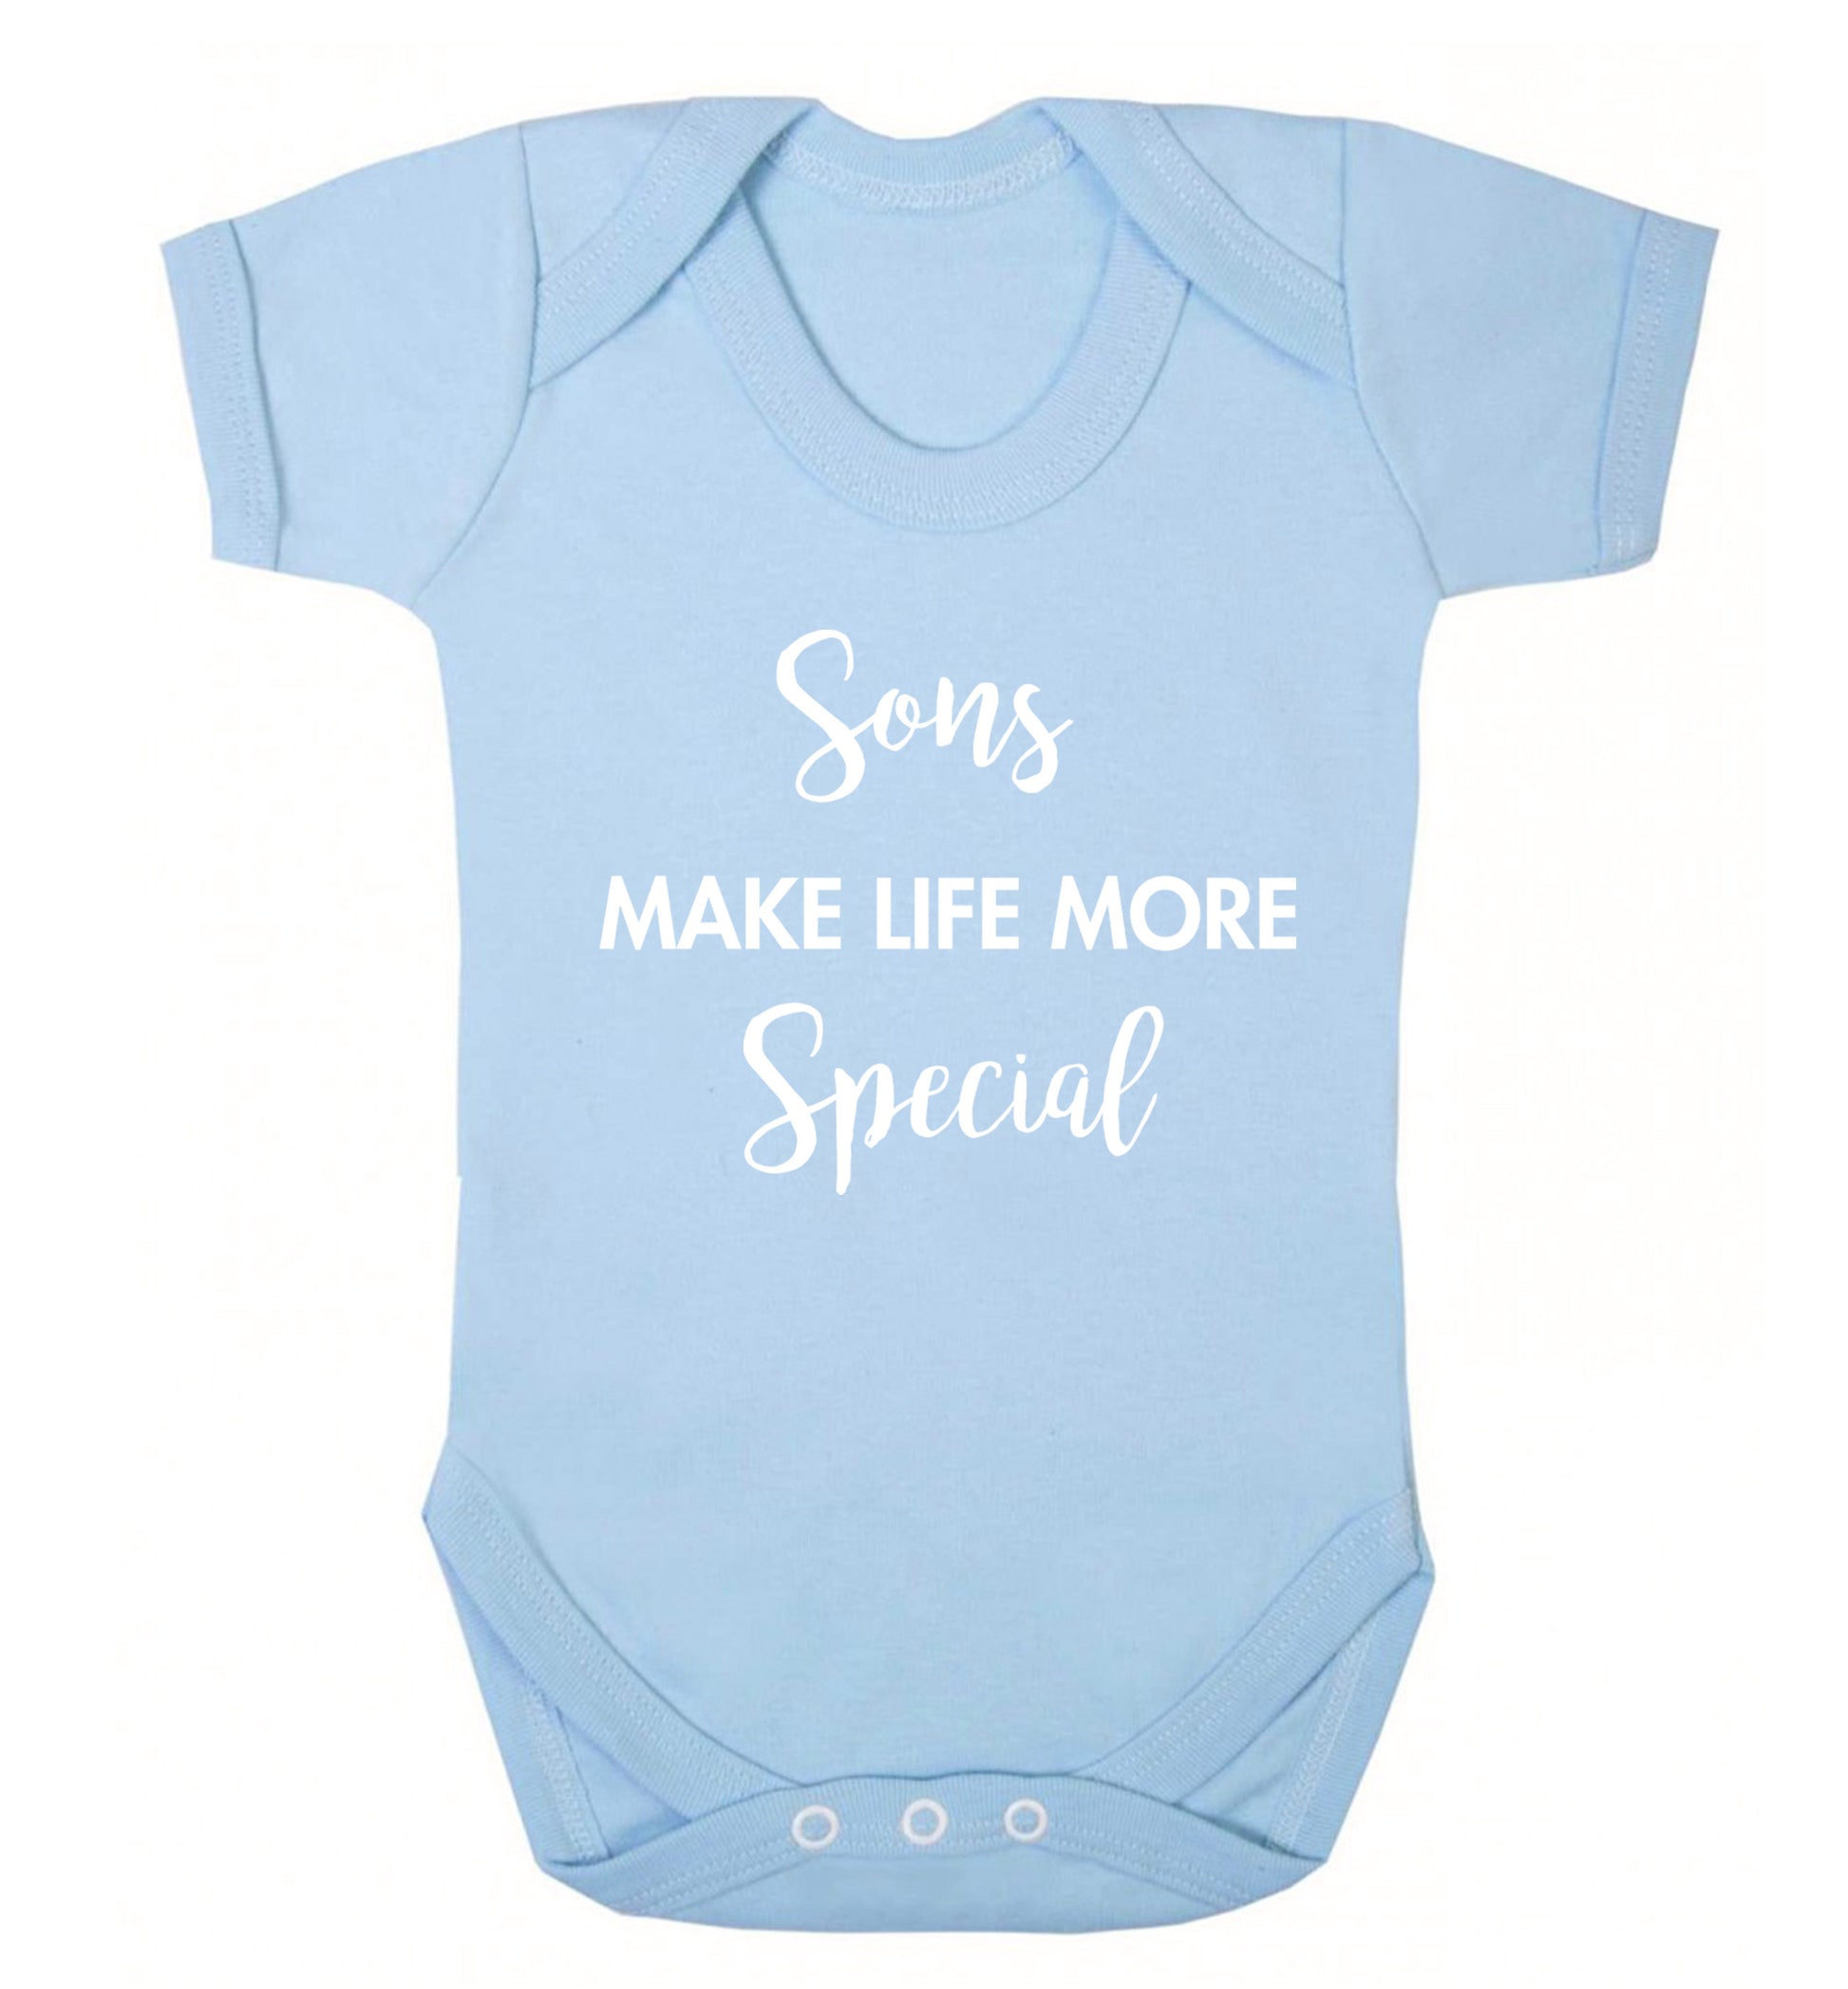 Daughters make life more special Baby Vest pale blue 18-24 months